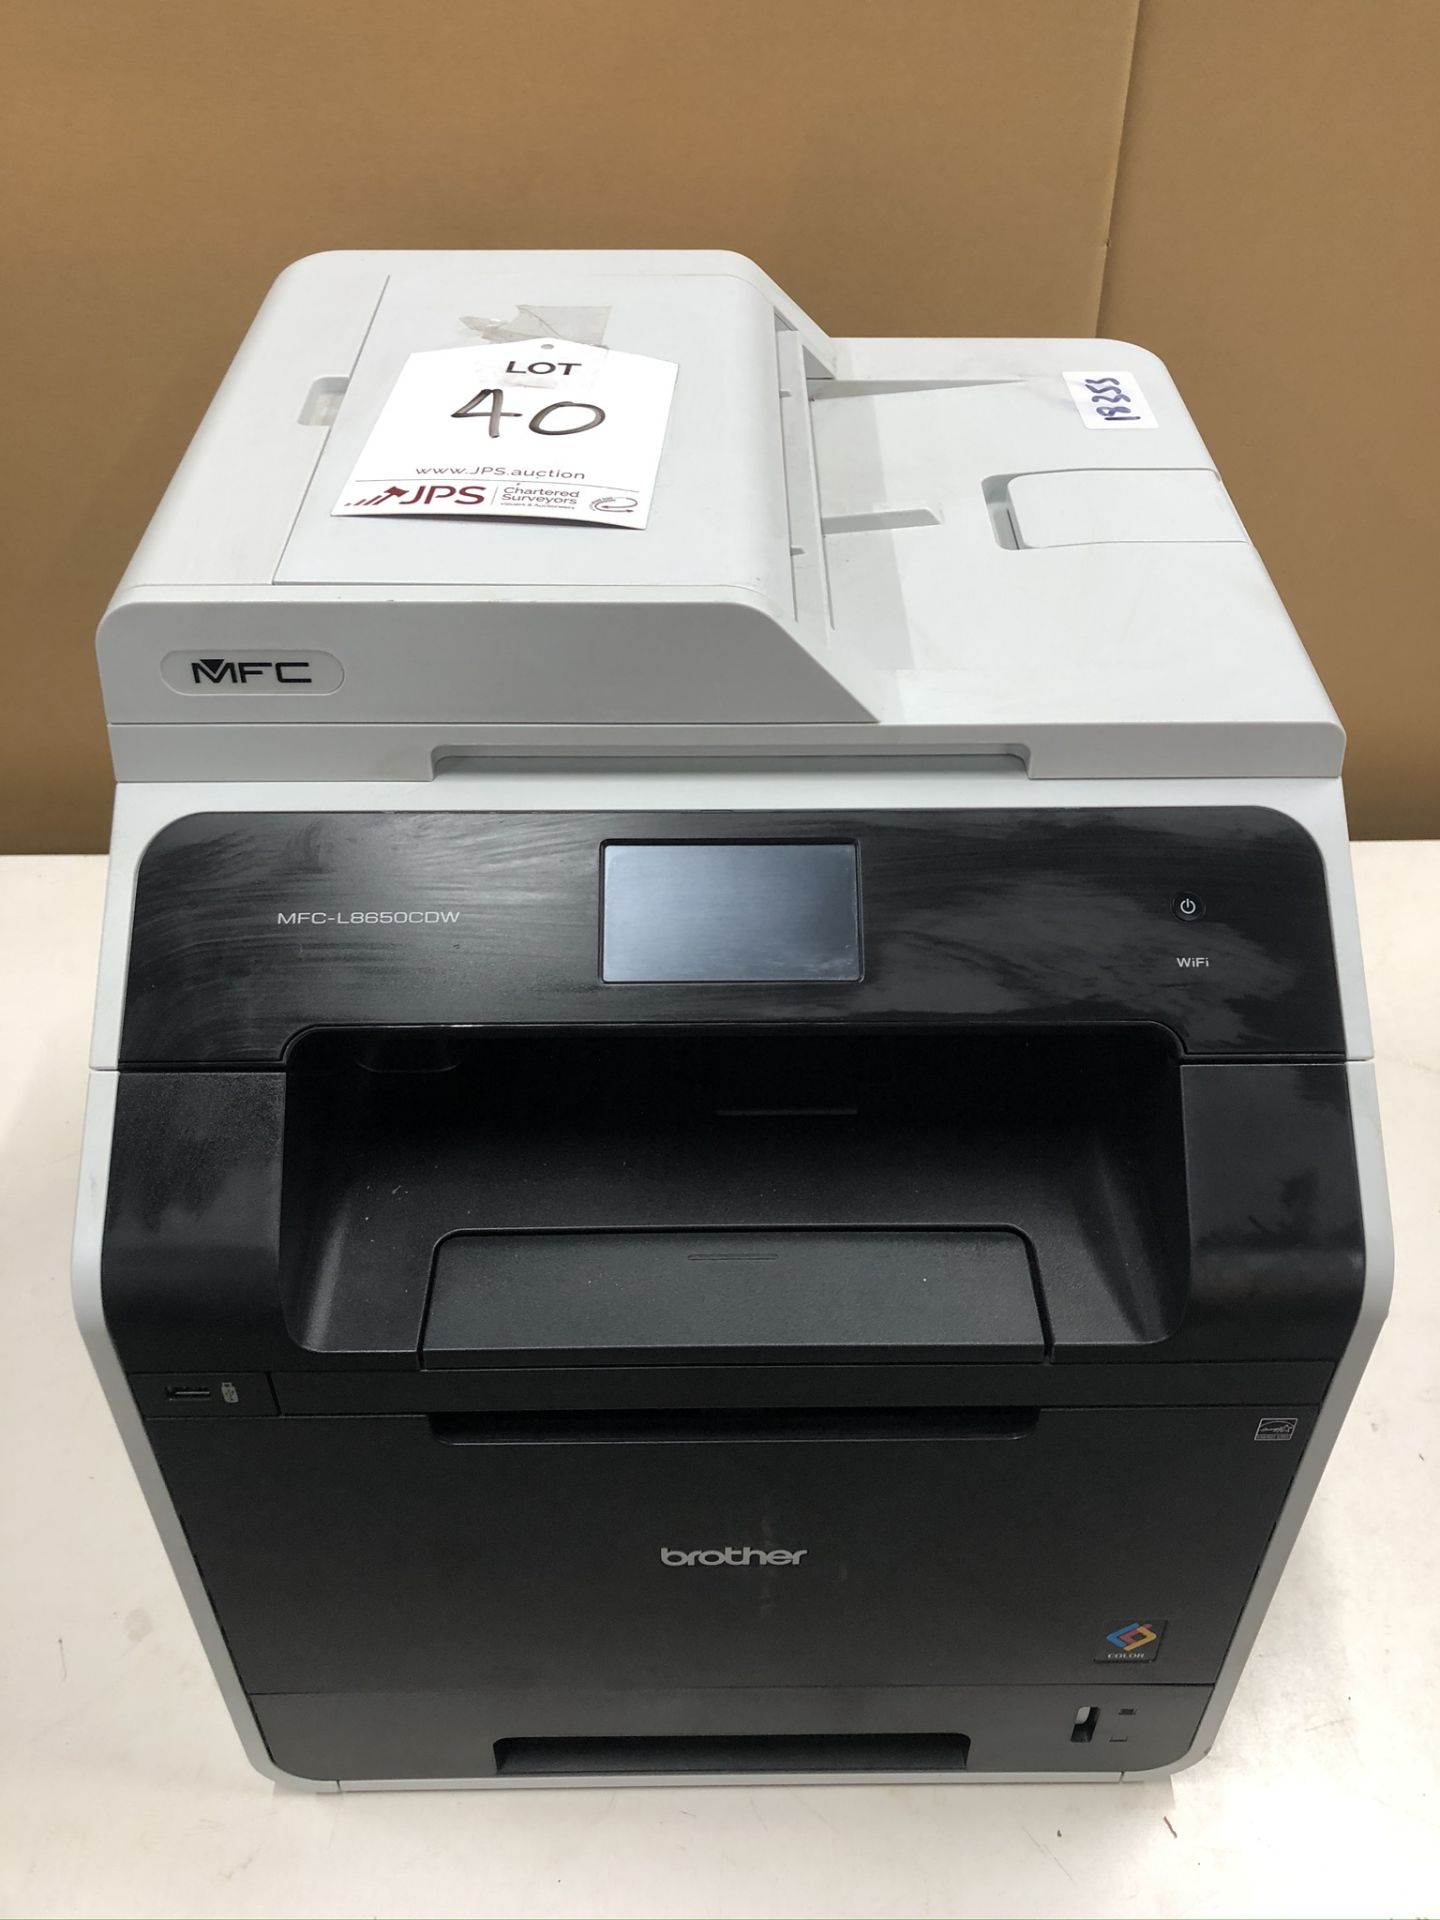 Brother MFC-L8650CDW Multi-Functional Printer - Image 2 of 4